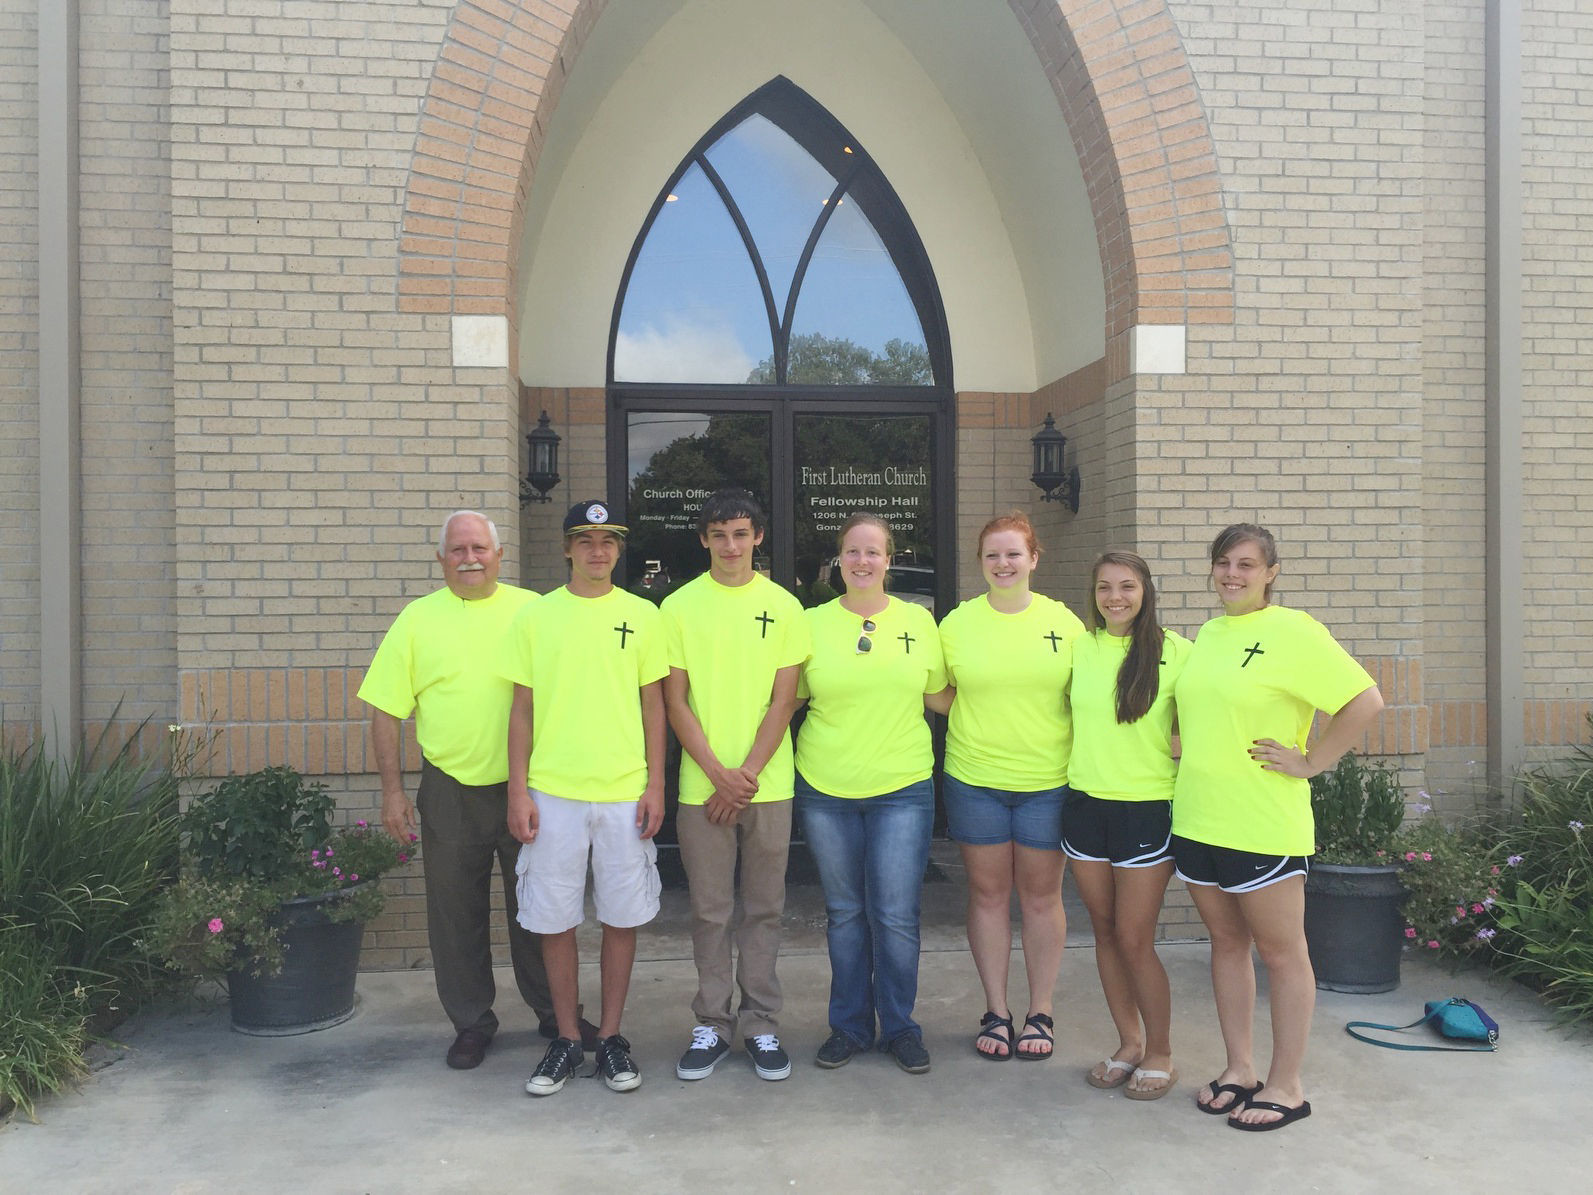 Members from the First Evangelical Lutheran Church of Gonzales traveled to Detroit last week to participate in the ELCA Youth Gathering to help clean up a neighborhood in the city. Pictured from left is Elgin Heinemeyer, Cody Oakes, Jacob Burek, Morgan Gates, Katherine Albin, Alexis Cappleman and Kaitlin Cappleman.